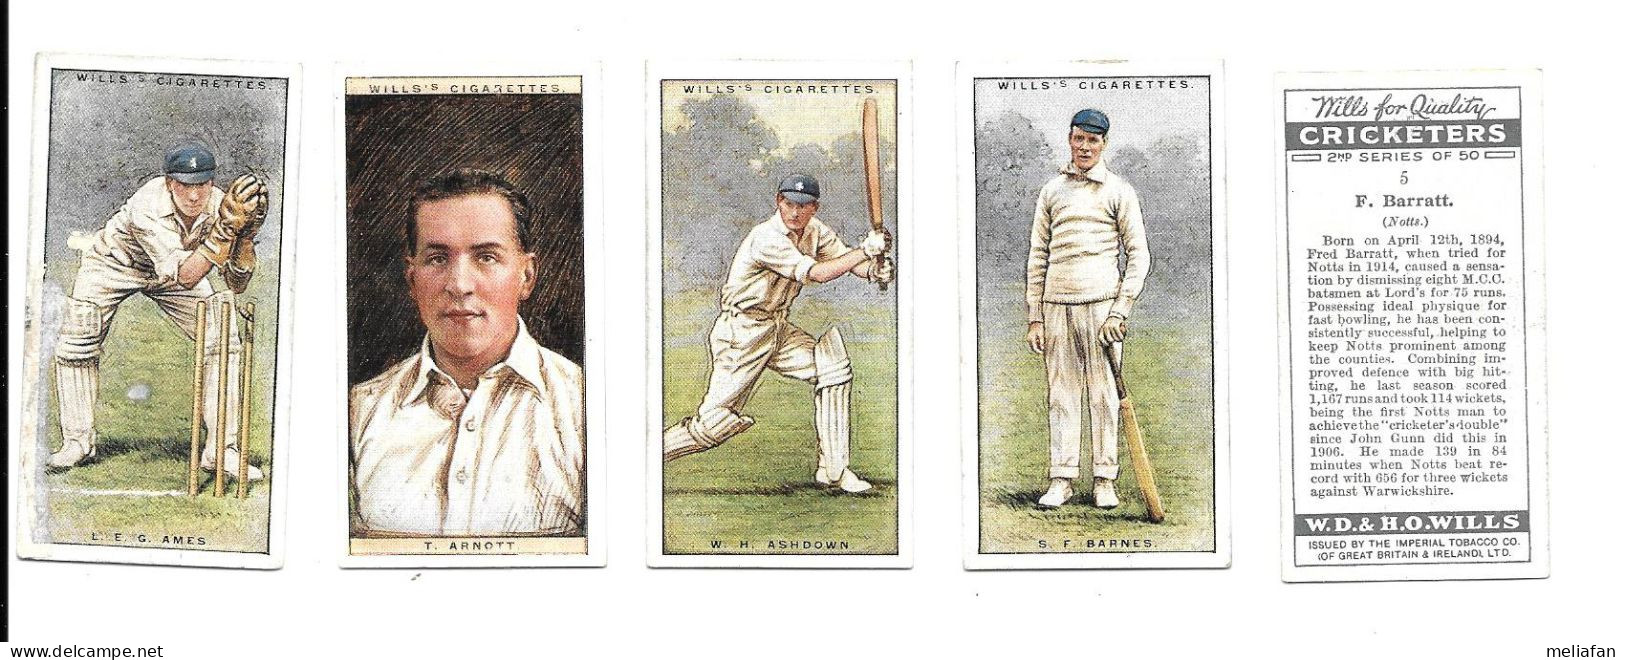 CJ65 - SERIE COMPLETE 50 CARTES CIGARETTES WILLS - CRICKETERS 2nd SERIES - Wills